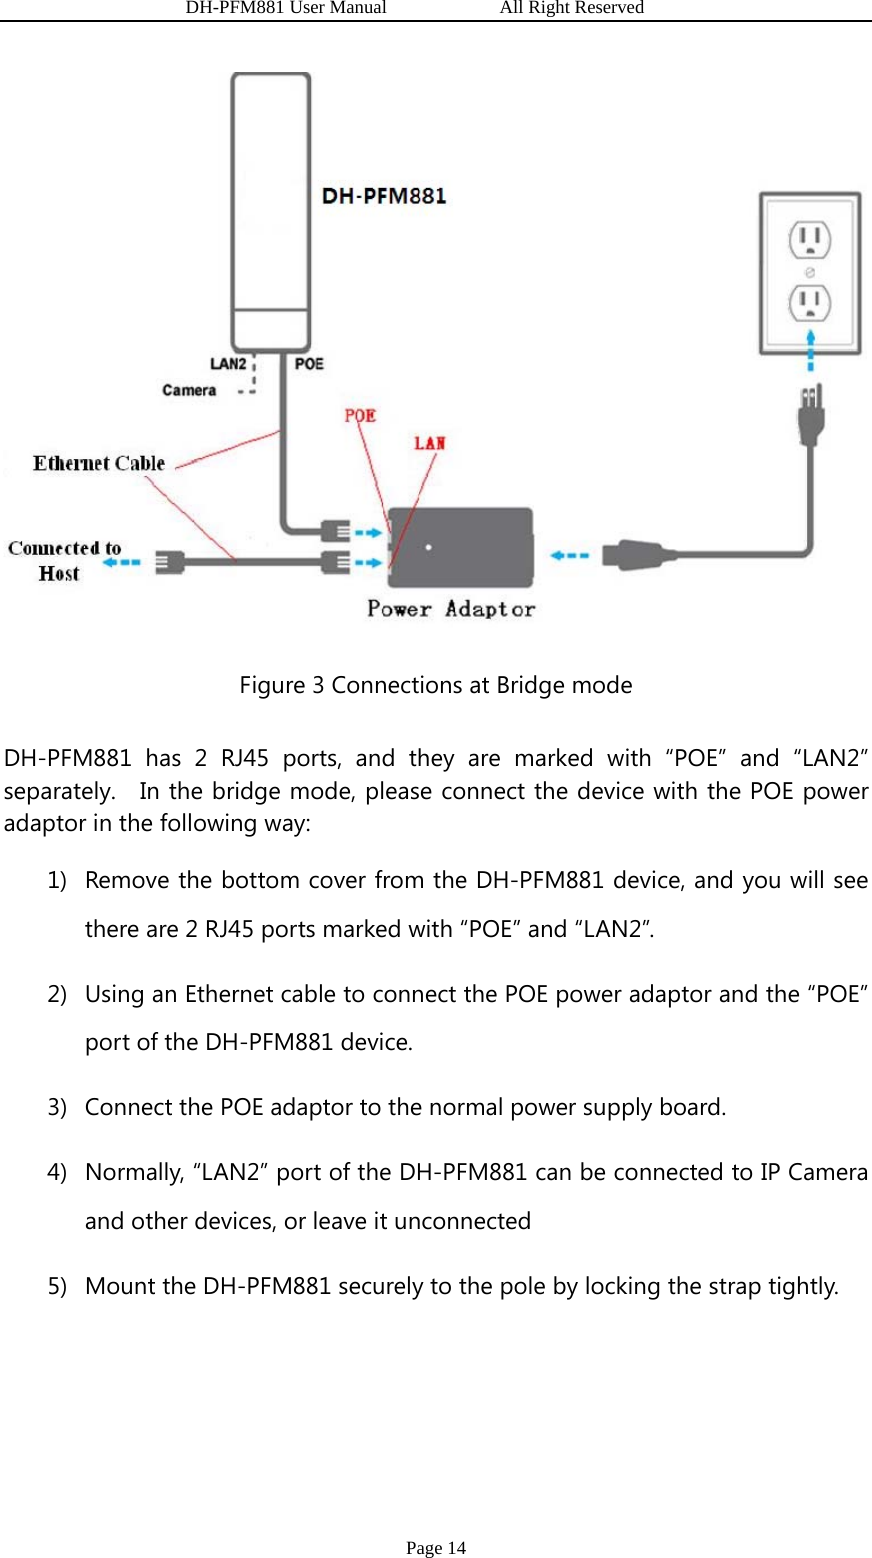                   DH-PFM881 User Manual            All Right Reserved Page 14  Figure 3 Connections at Bridge mode DH-PFM881 has 2 RJ45 ports, and they are marked with “POE” and “LAN2” separately.   In the bridge mode, please connect the device with the POE power adaptor in the following way: 1) Remove the bottom cover from the DH-PFM881 device, and you will see there are 2 RJ45 ports marked with “POE” and “LAN2”. 2) Using an Ethernet cable to connect the POE power adaptor and the “POE” port of the DH-PFM881 device. 3) Connect the POE adaptor to the normal power supply board. 4) Normally, “LAN2” port of the DH-PFM881 can be connected to IP Camera and other devices, or leave it unconnected 5) Mount the DH-PFM881 securely to the pole by locking the strap tightly.  